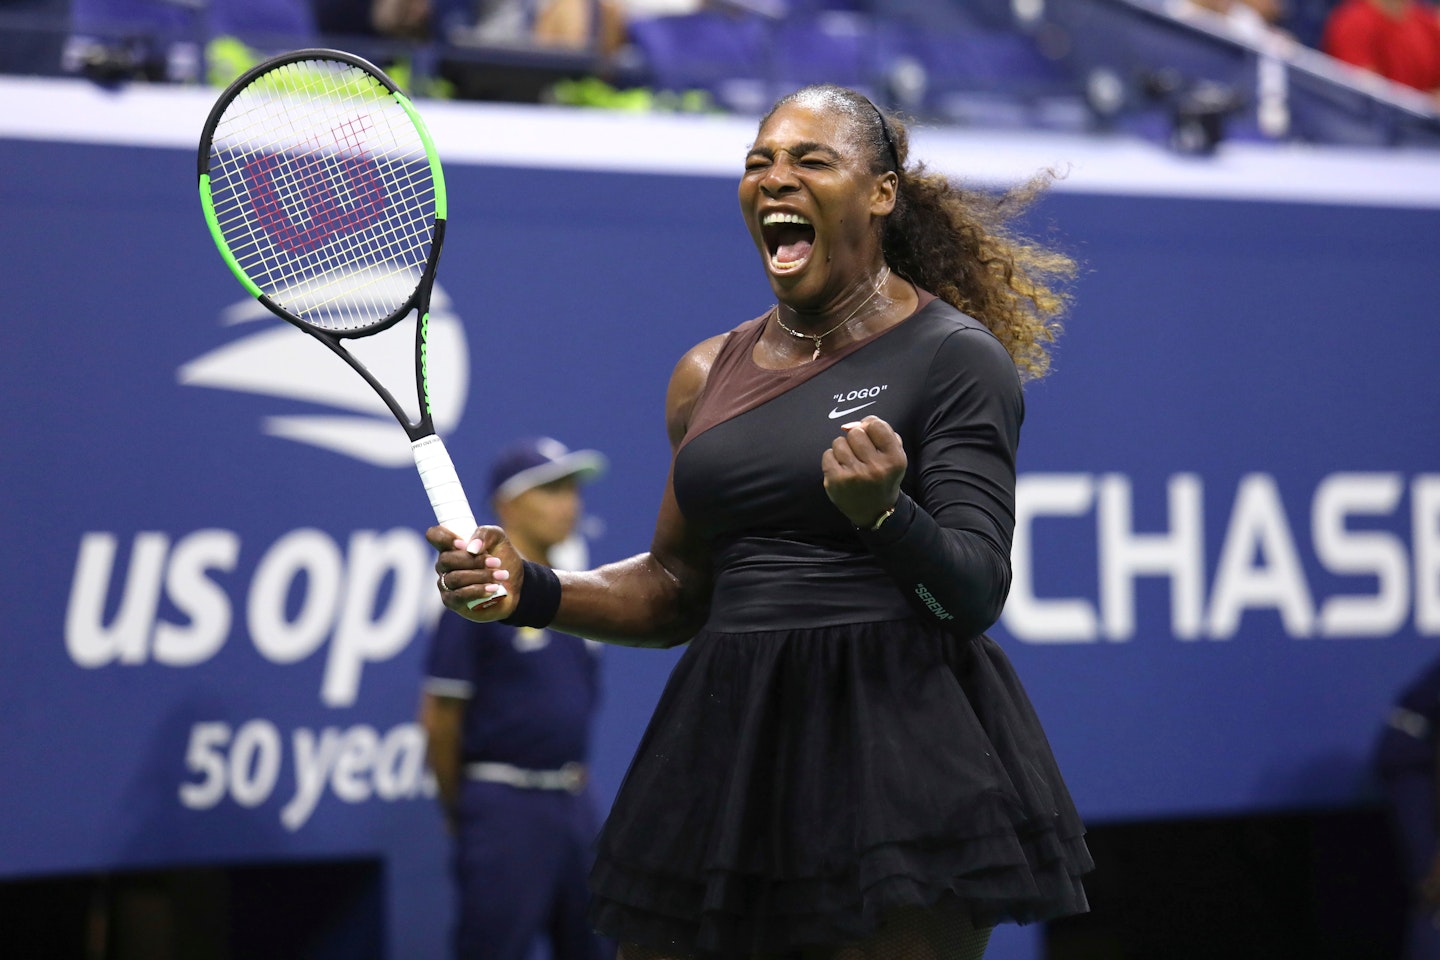 Serena Williams' Best Fashion Moments on the Tennis Court